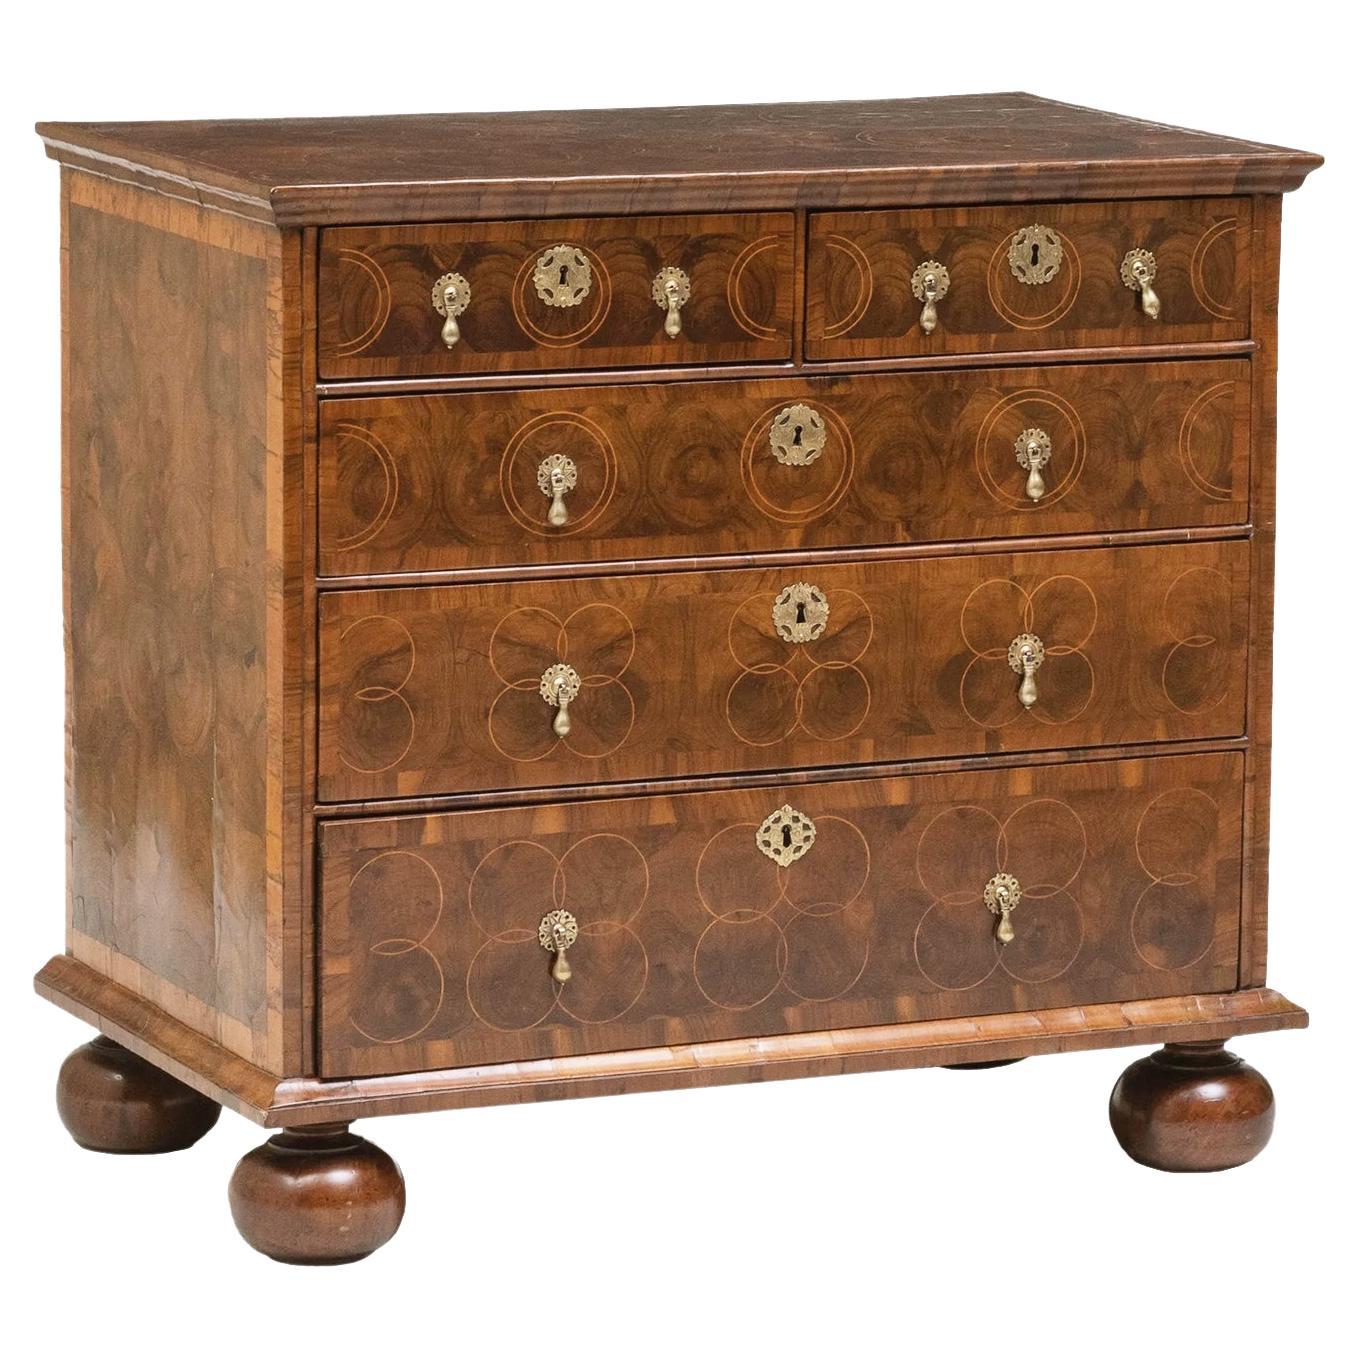 18th Century William & Mary Chest of Drawers with Oyster Inlays